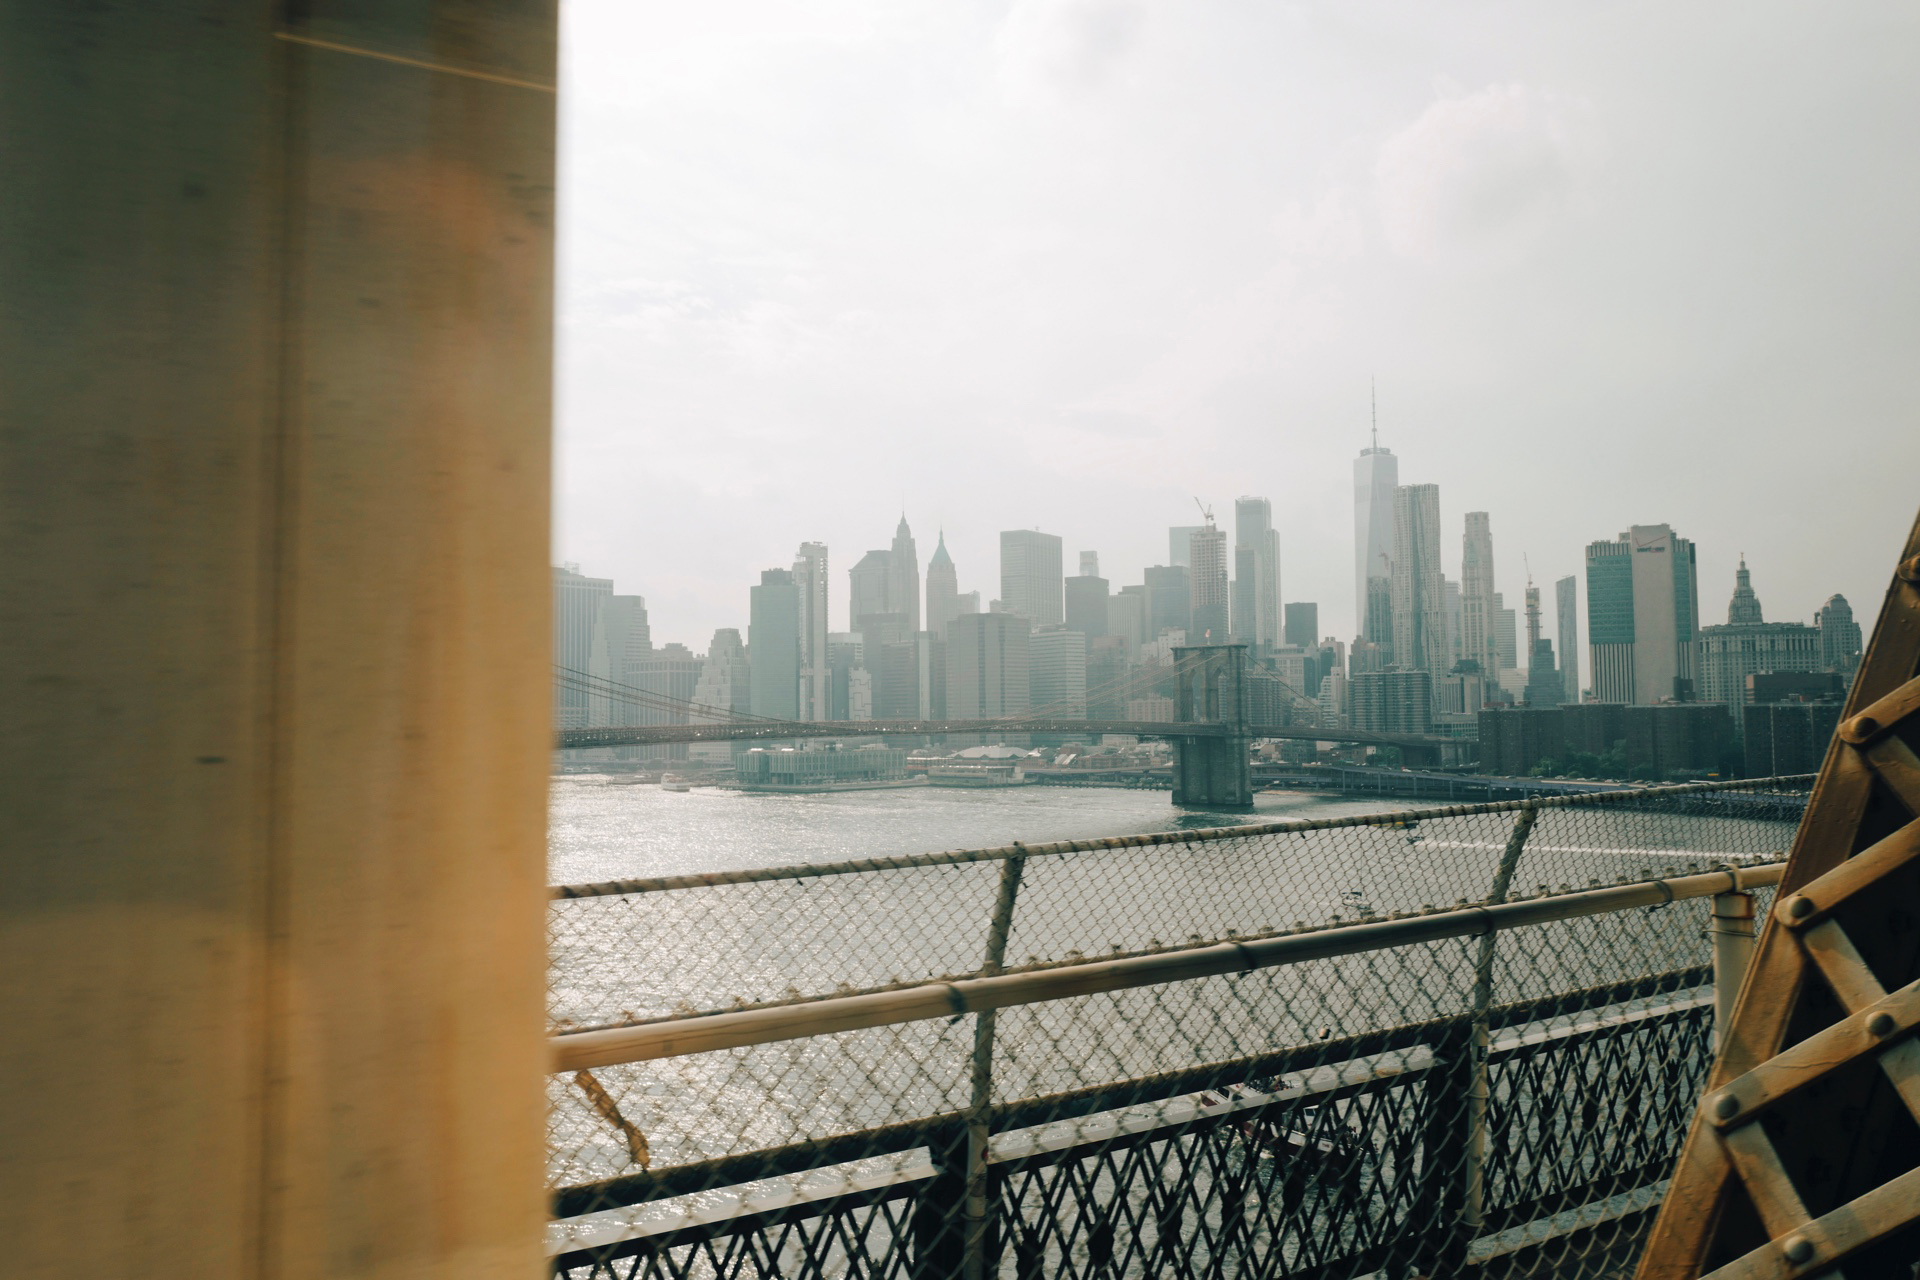 new york c max wessely trains leica q